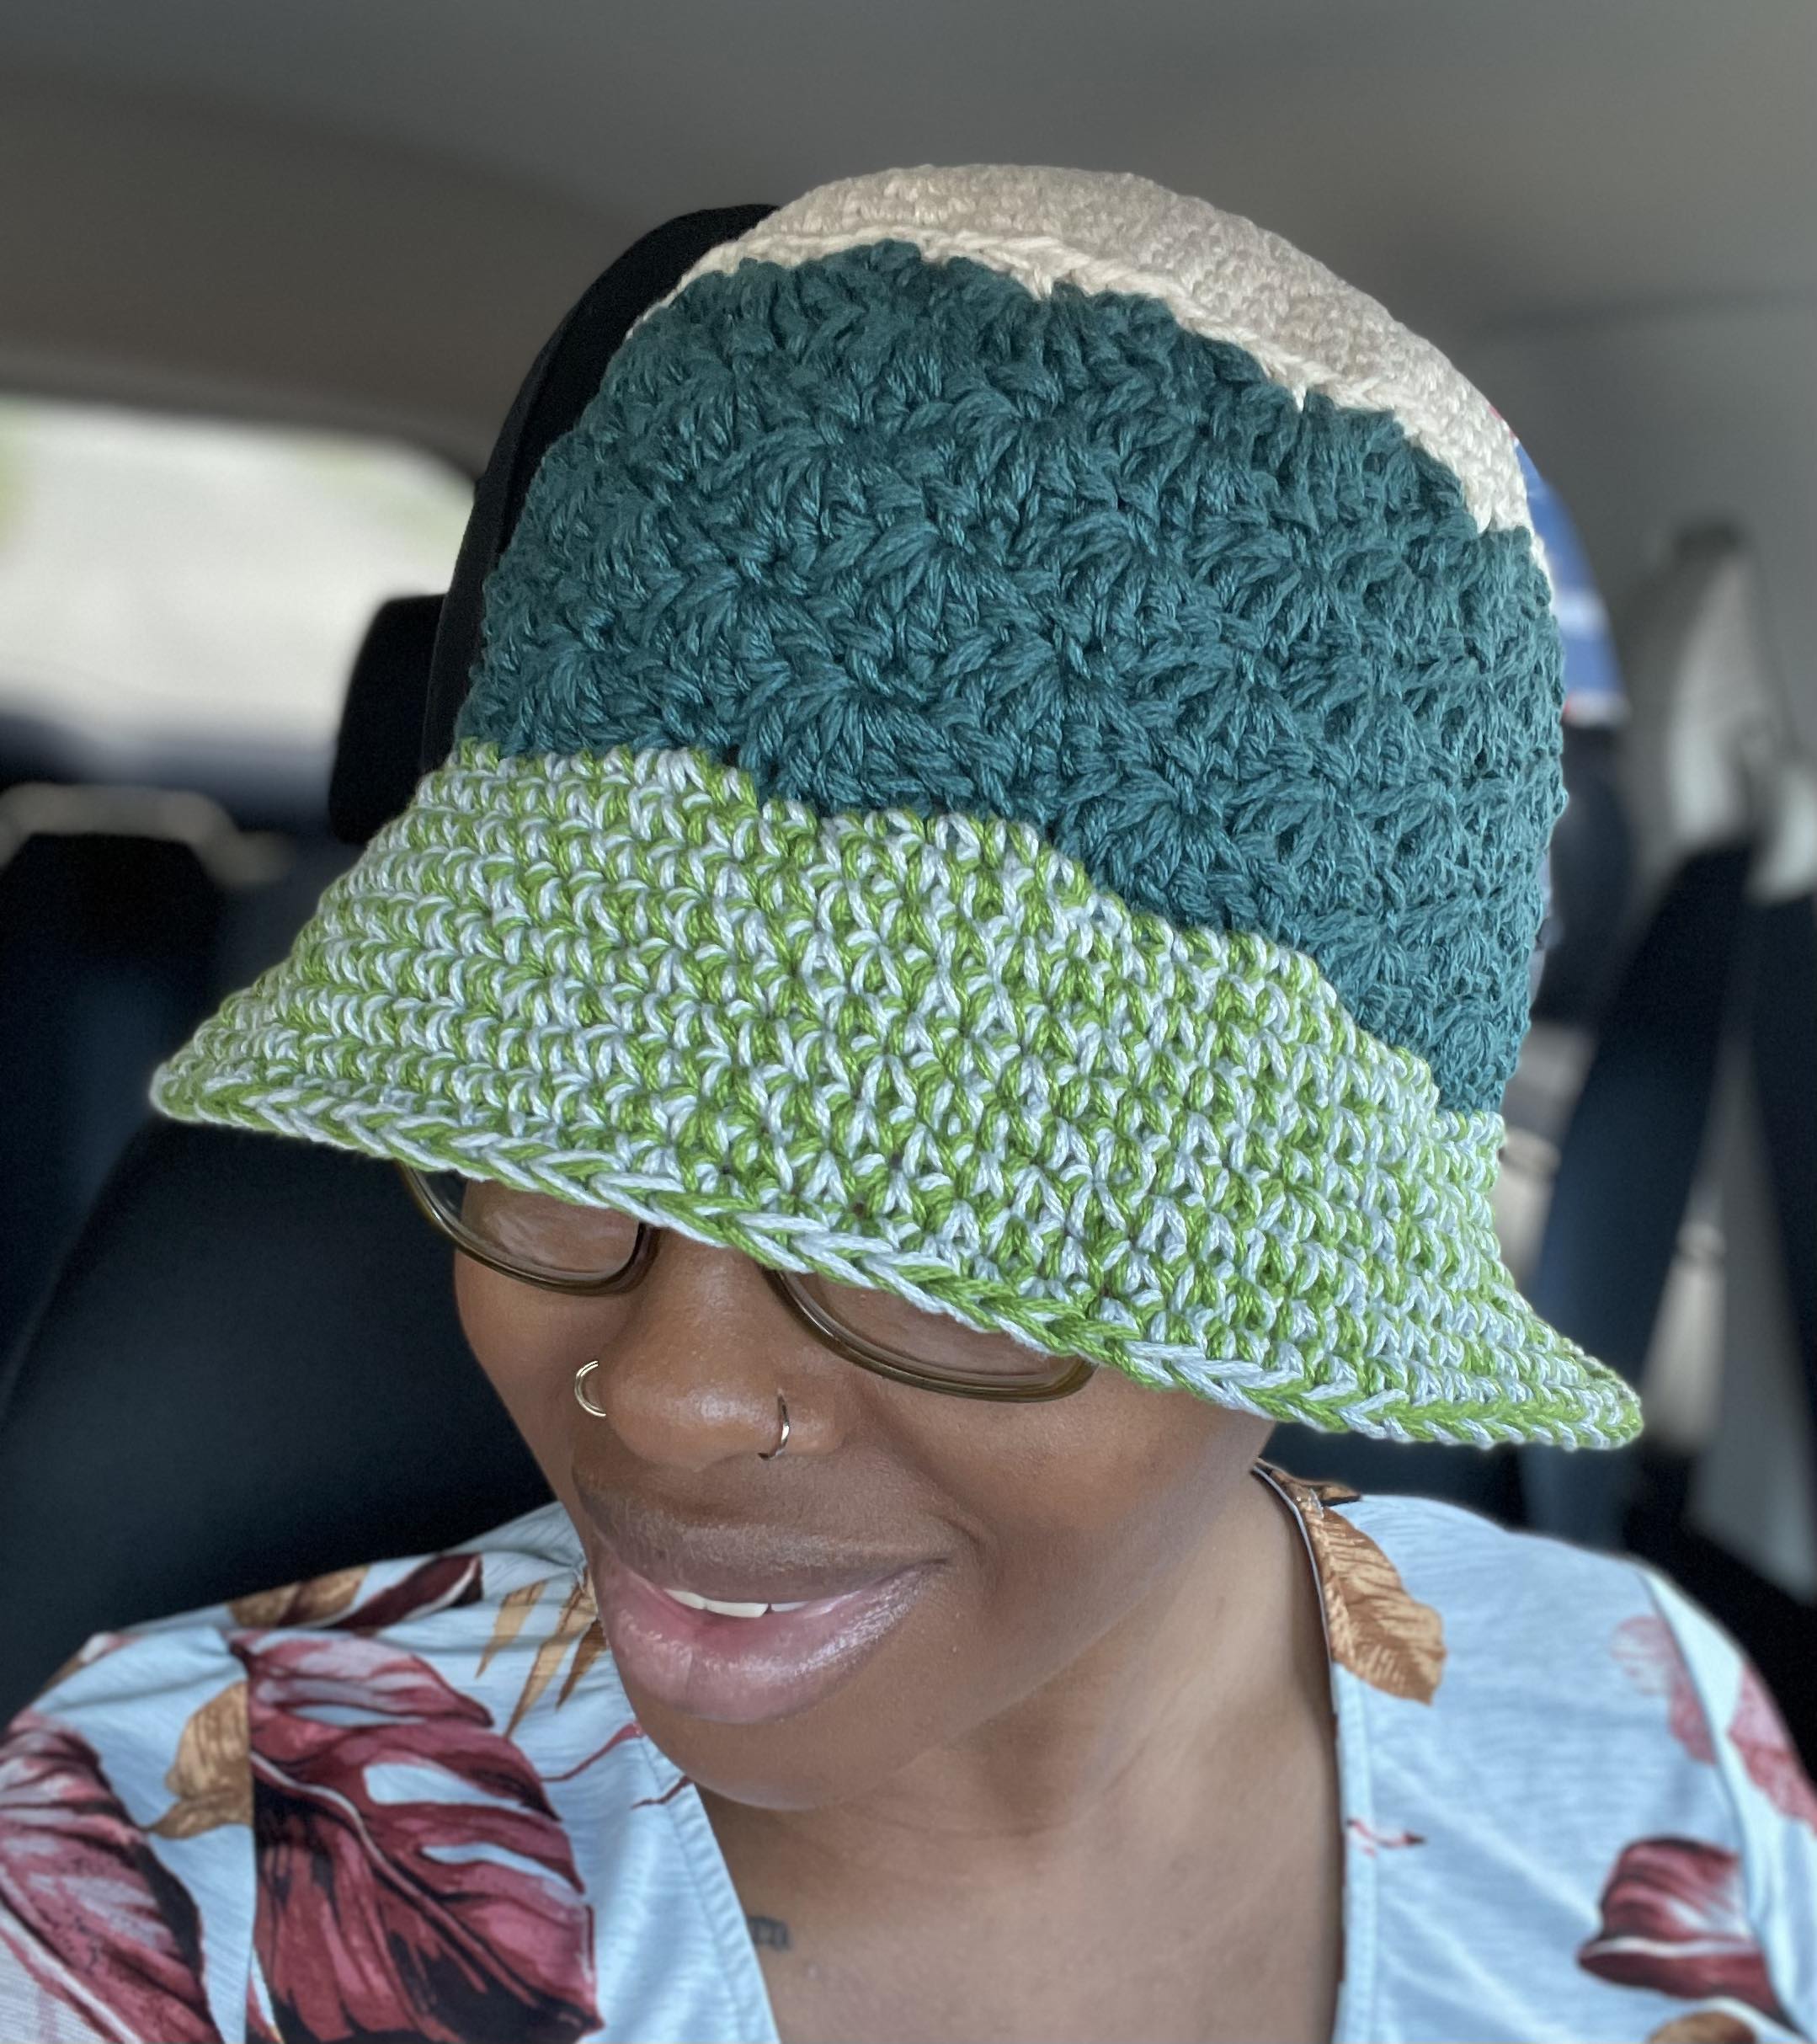 How to Crochet a Bucket Hat